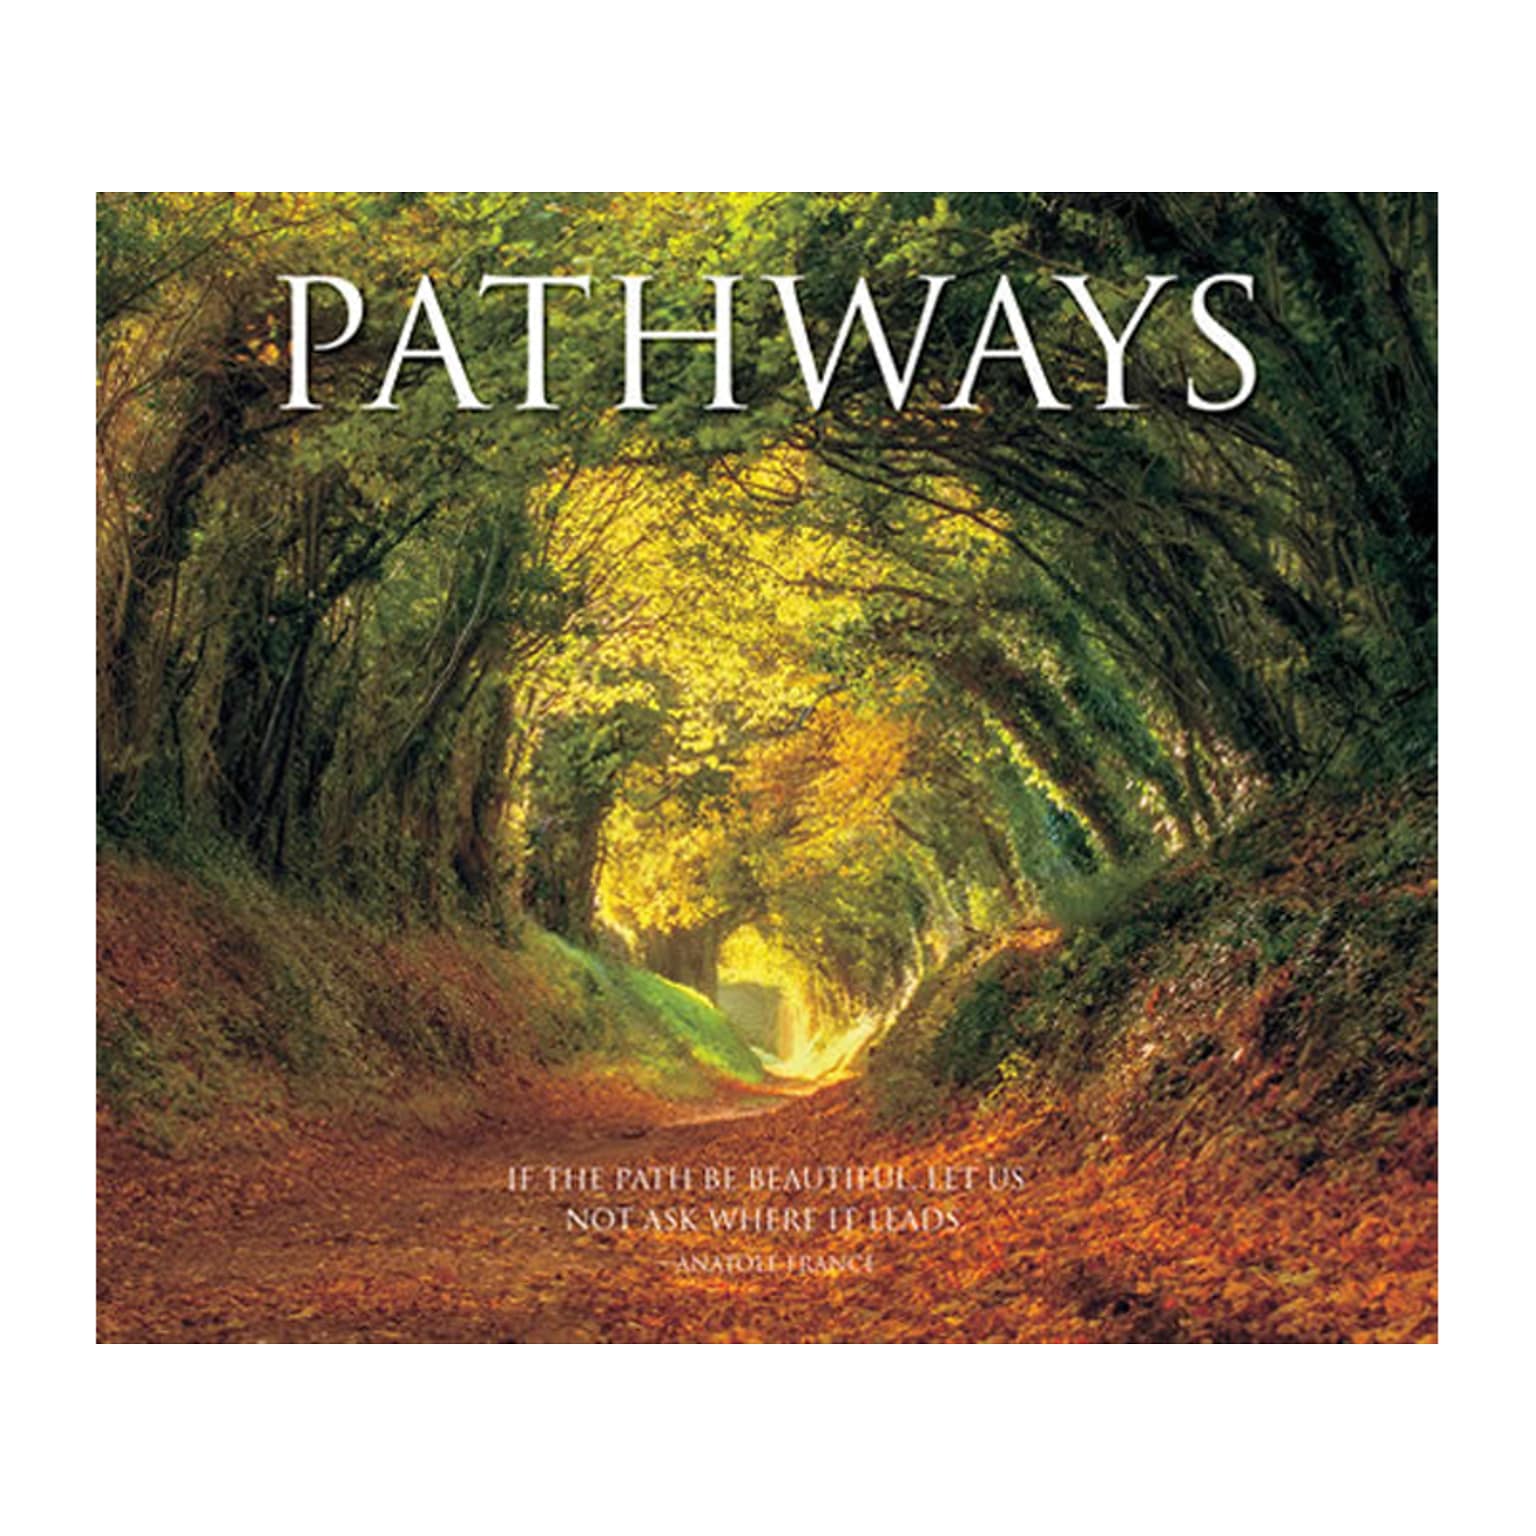 Pathways, Chapter Book, Hardcover (48345)